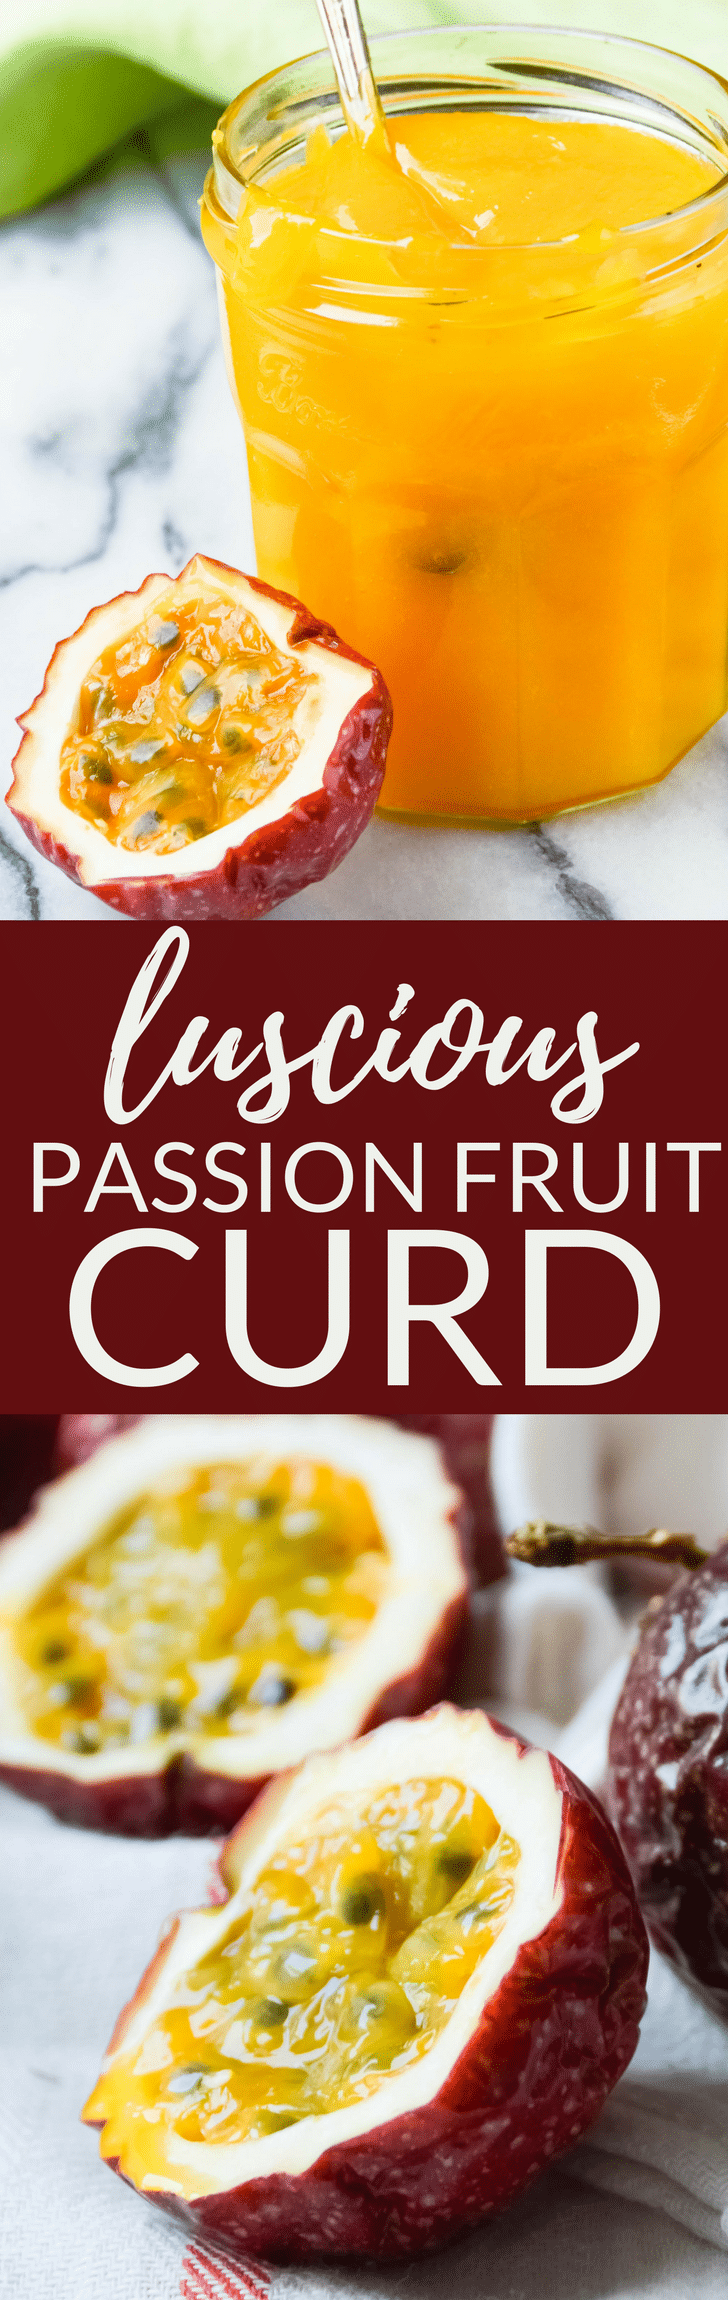 Looking for the best fruit curd recipe? Sweet Tart Passion Fruit Curd is a mouthwatering filling for tarts and trifles. If you like lemon curd, this easy curd recipe will blow your mind! #passionfruit #passionfruitrecipes #curdrecipes #fruitcurdrecipes #curd #passionfruitcurd #howtomakepassionfruitcurd #howtousepassionfruit #passionfruitrecipe